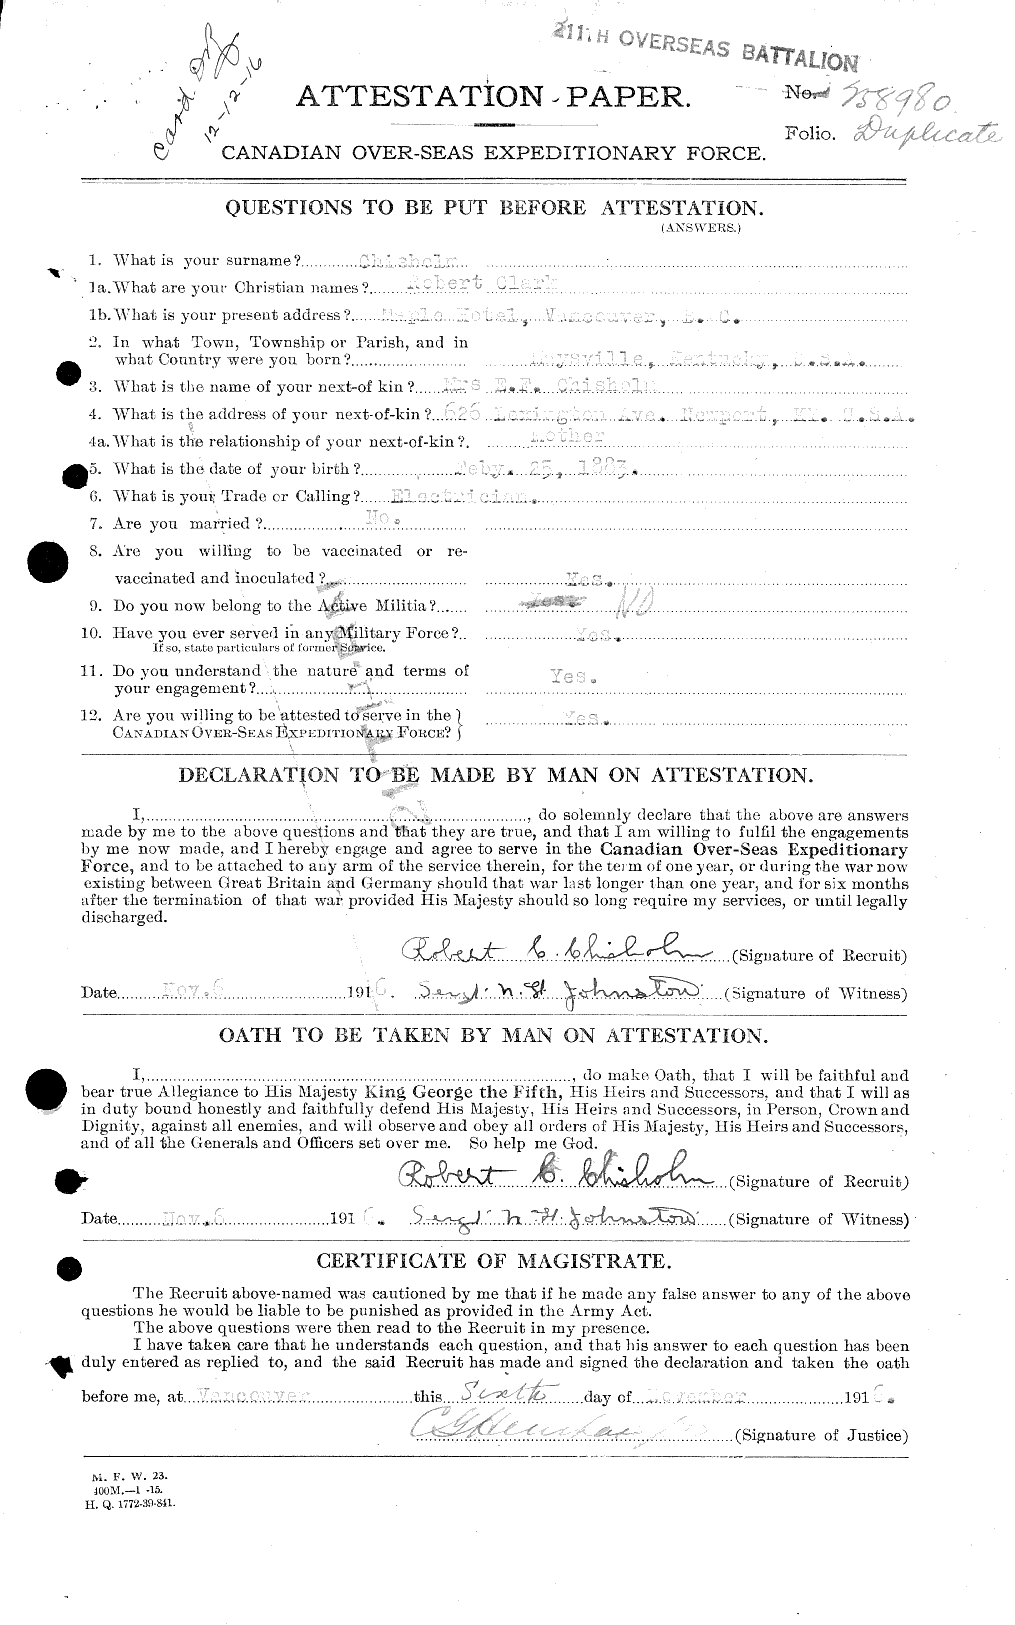 Personnel Records of the First World War - CEF 018353a